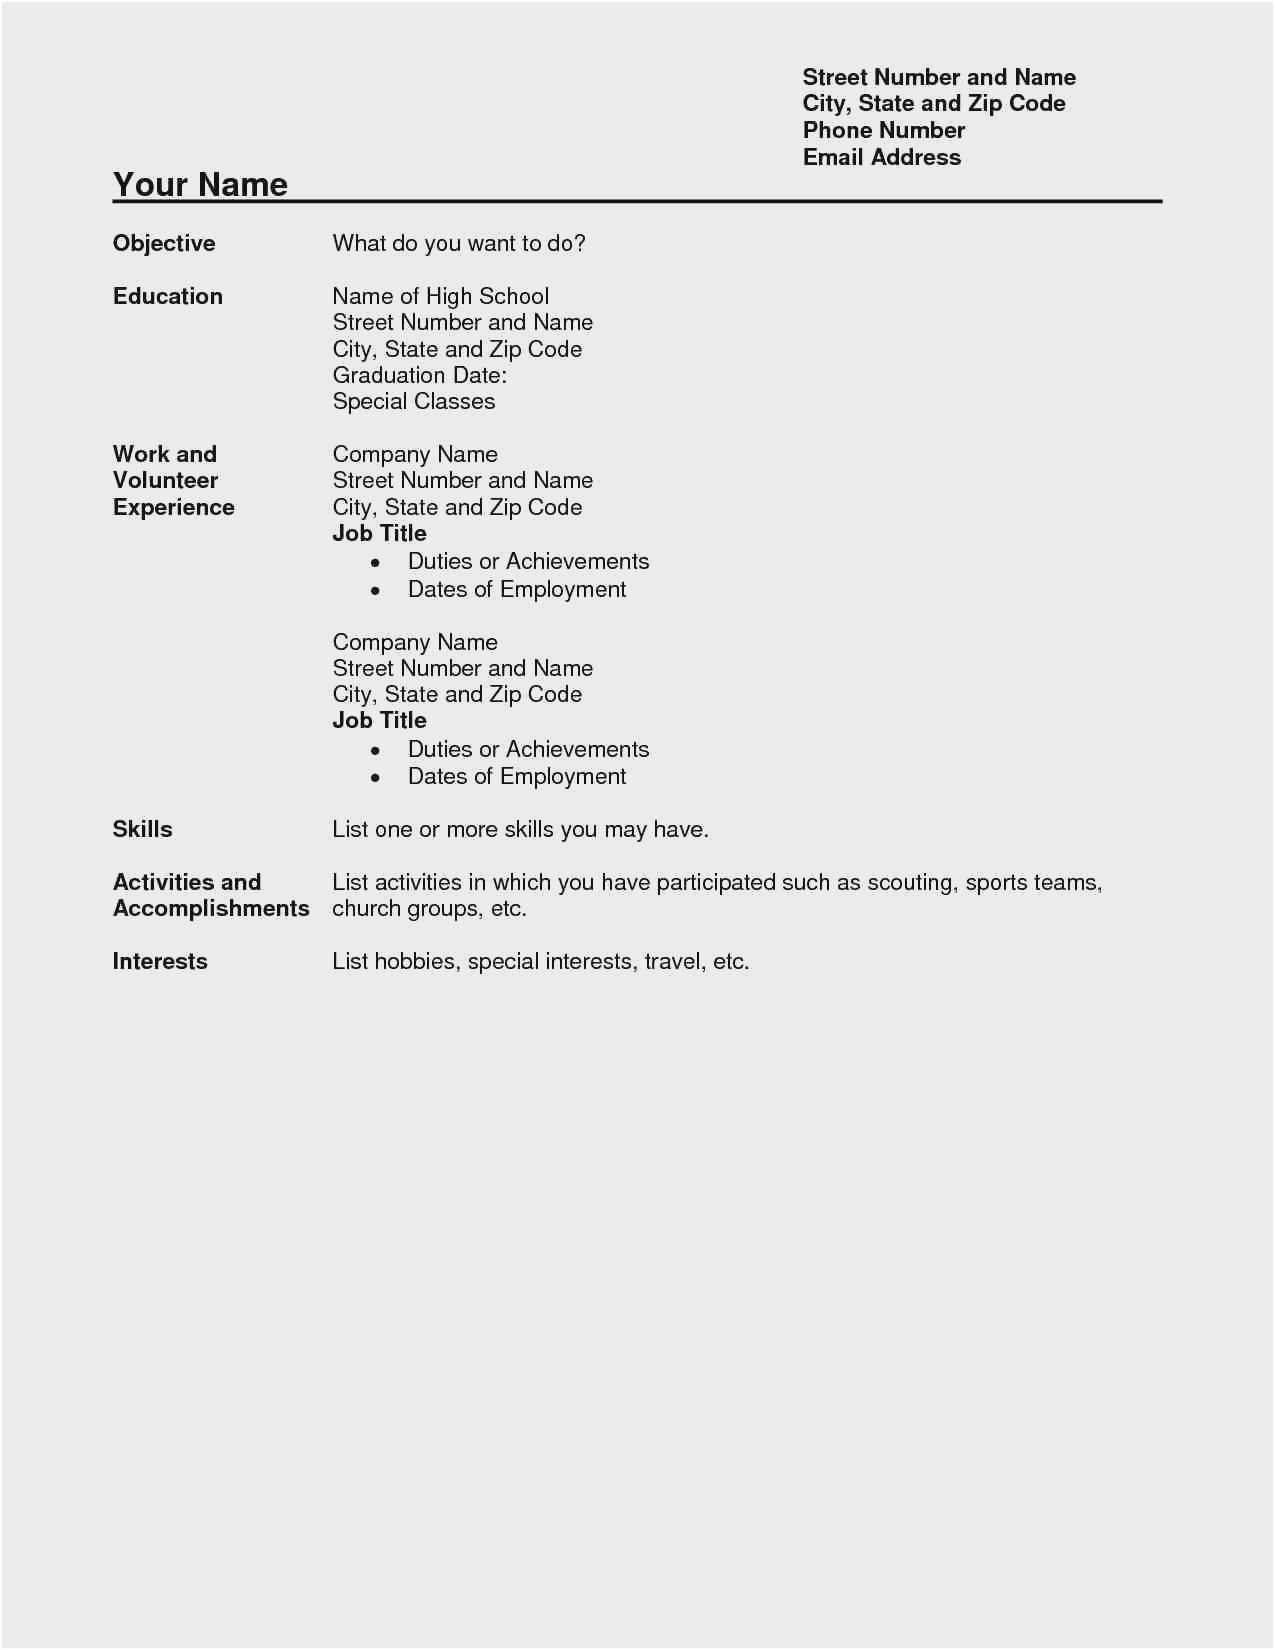 Resume Template for someone with No Work Experience Resume for someone with No Work Experience format 44